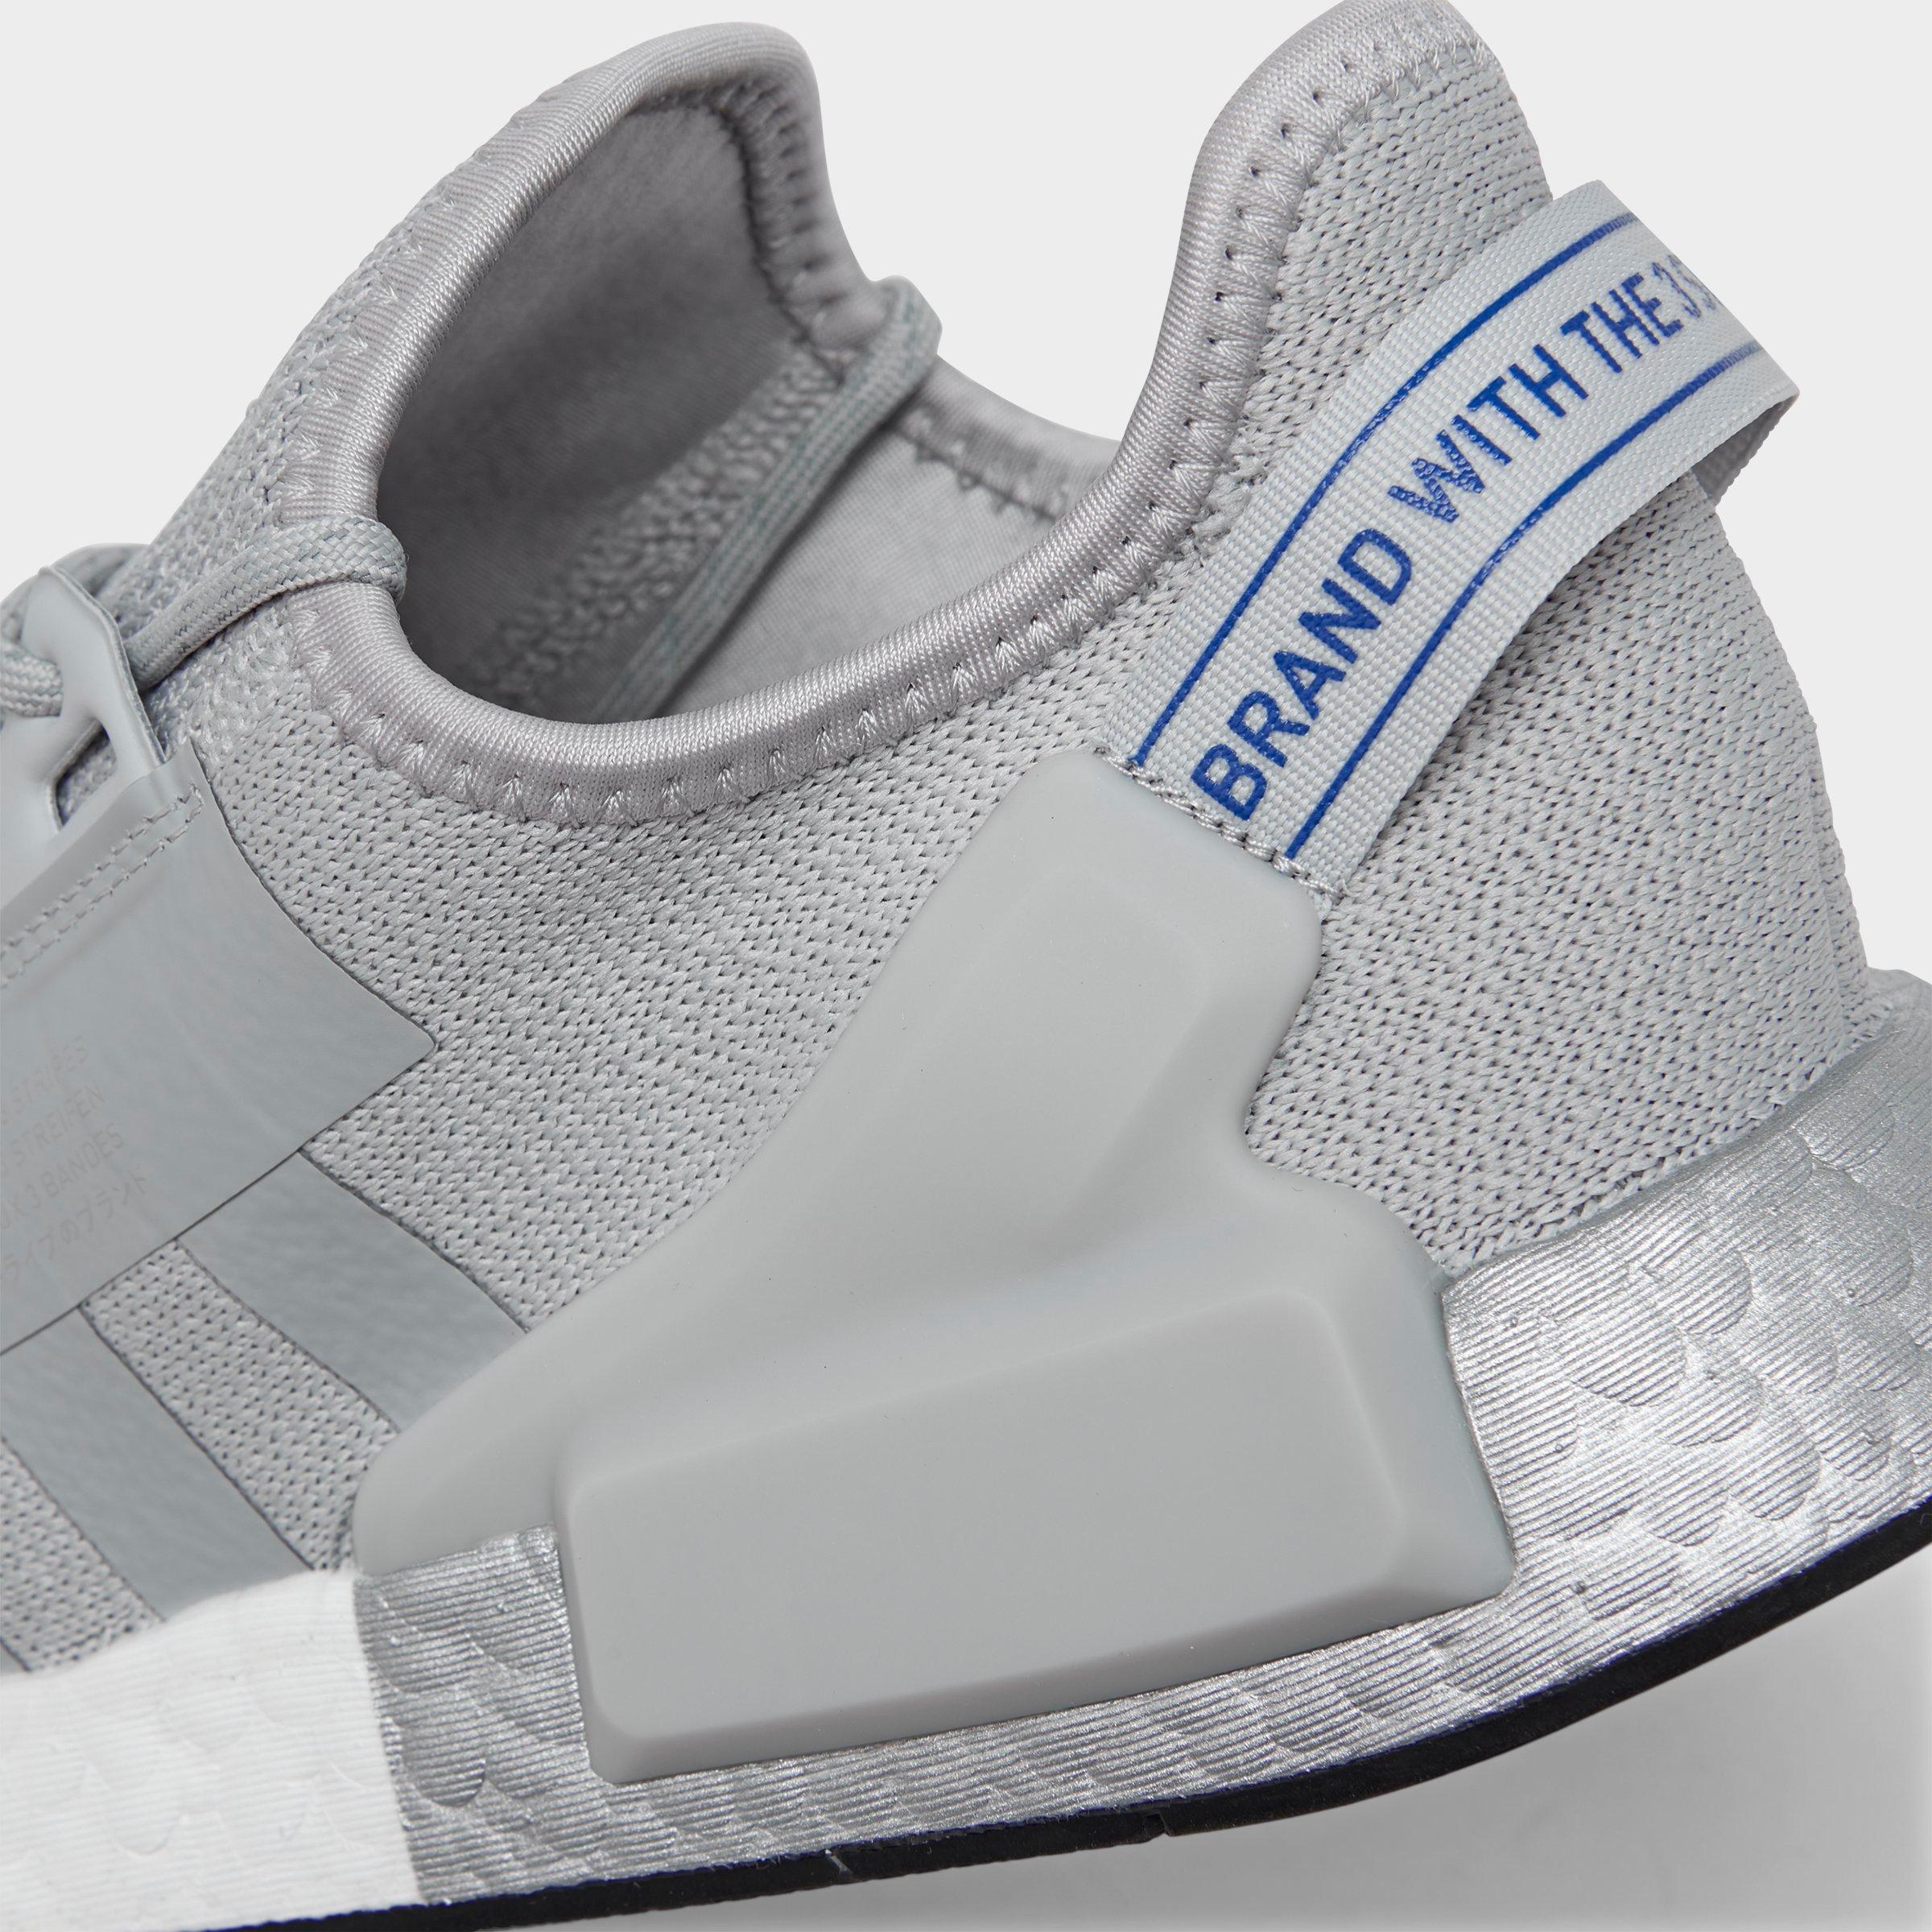 adidas nmd r1 releaseVery Low Prices mutilicomtr